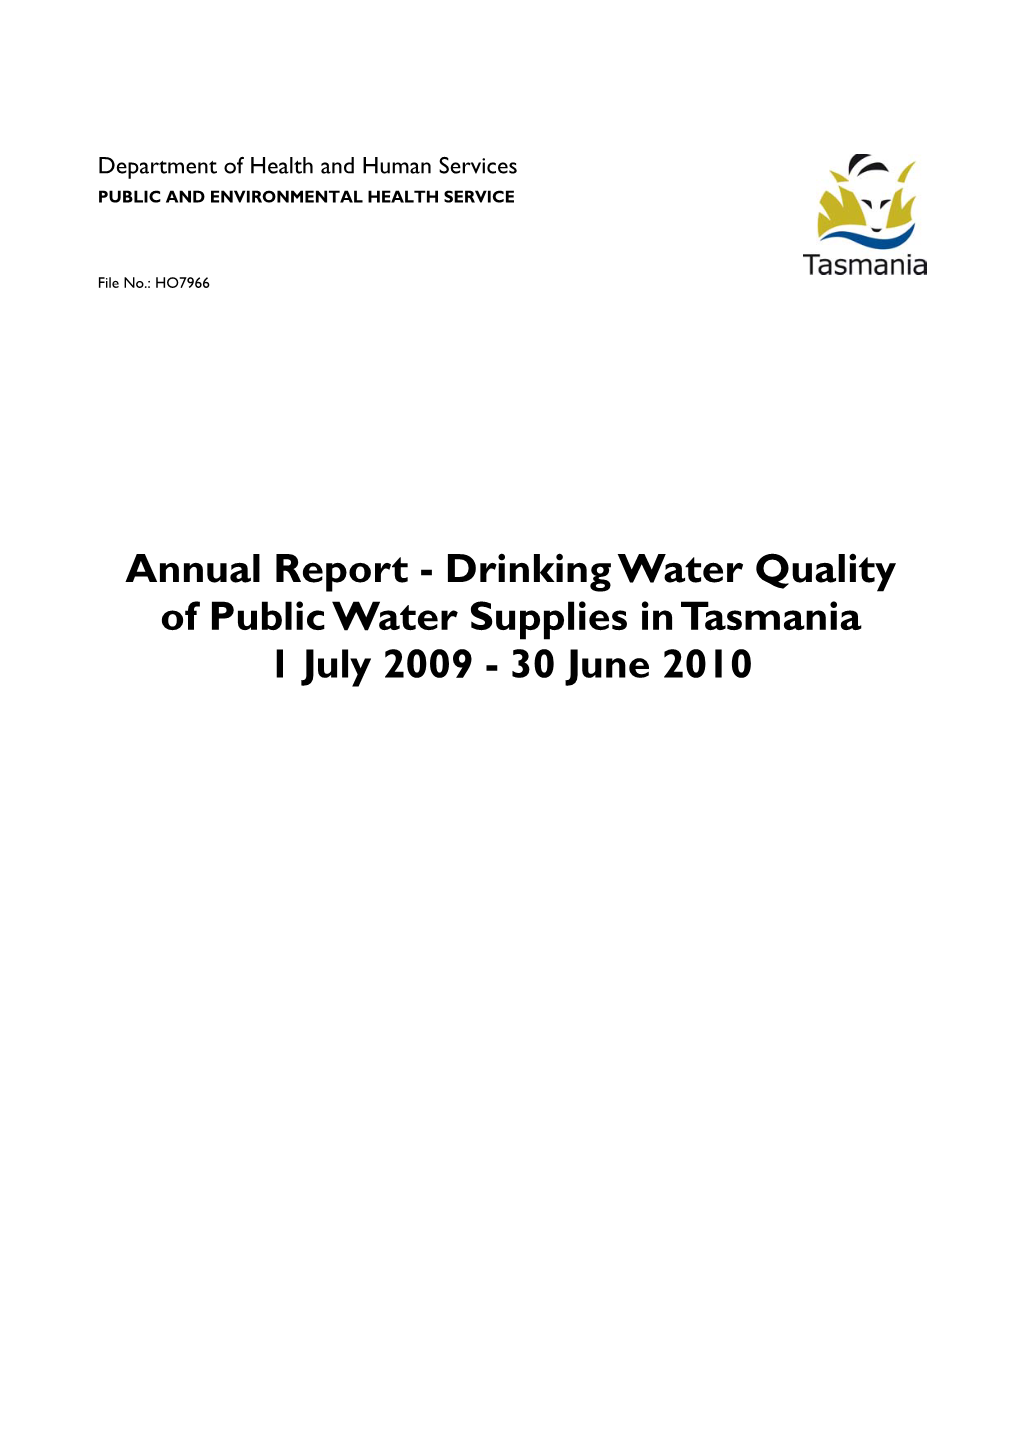 Annual Report - Drinking Water Quality of Public Water Supplies in Tasmania 1 July 2009 - 30 June 2010